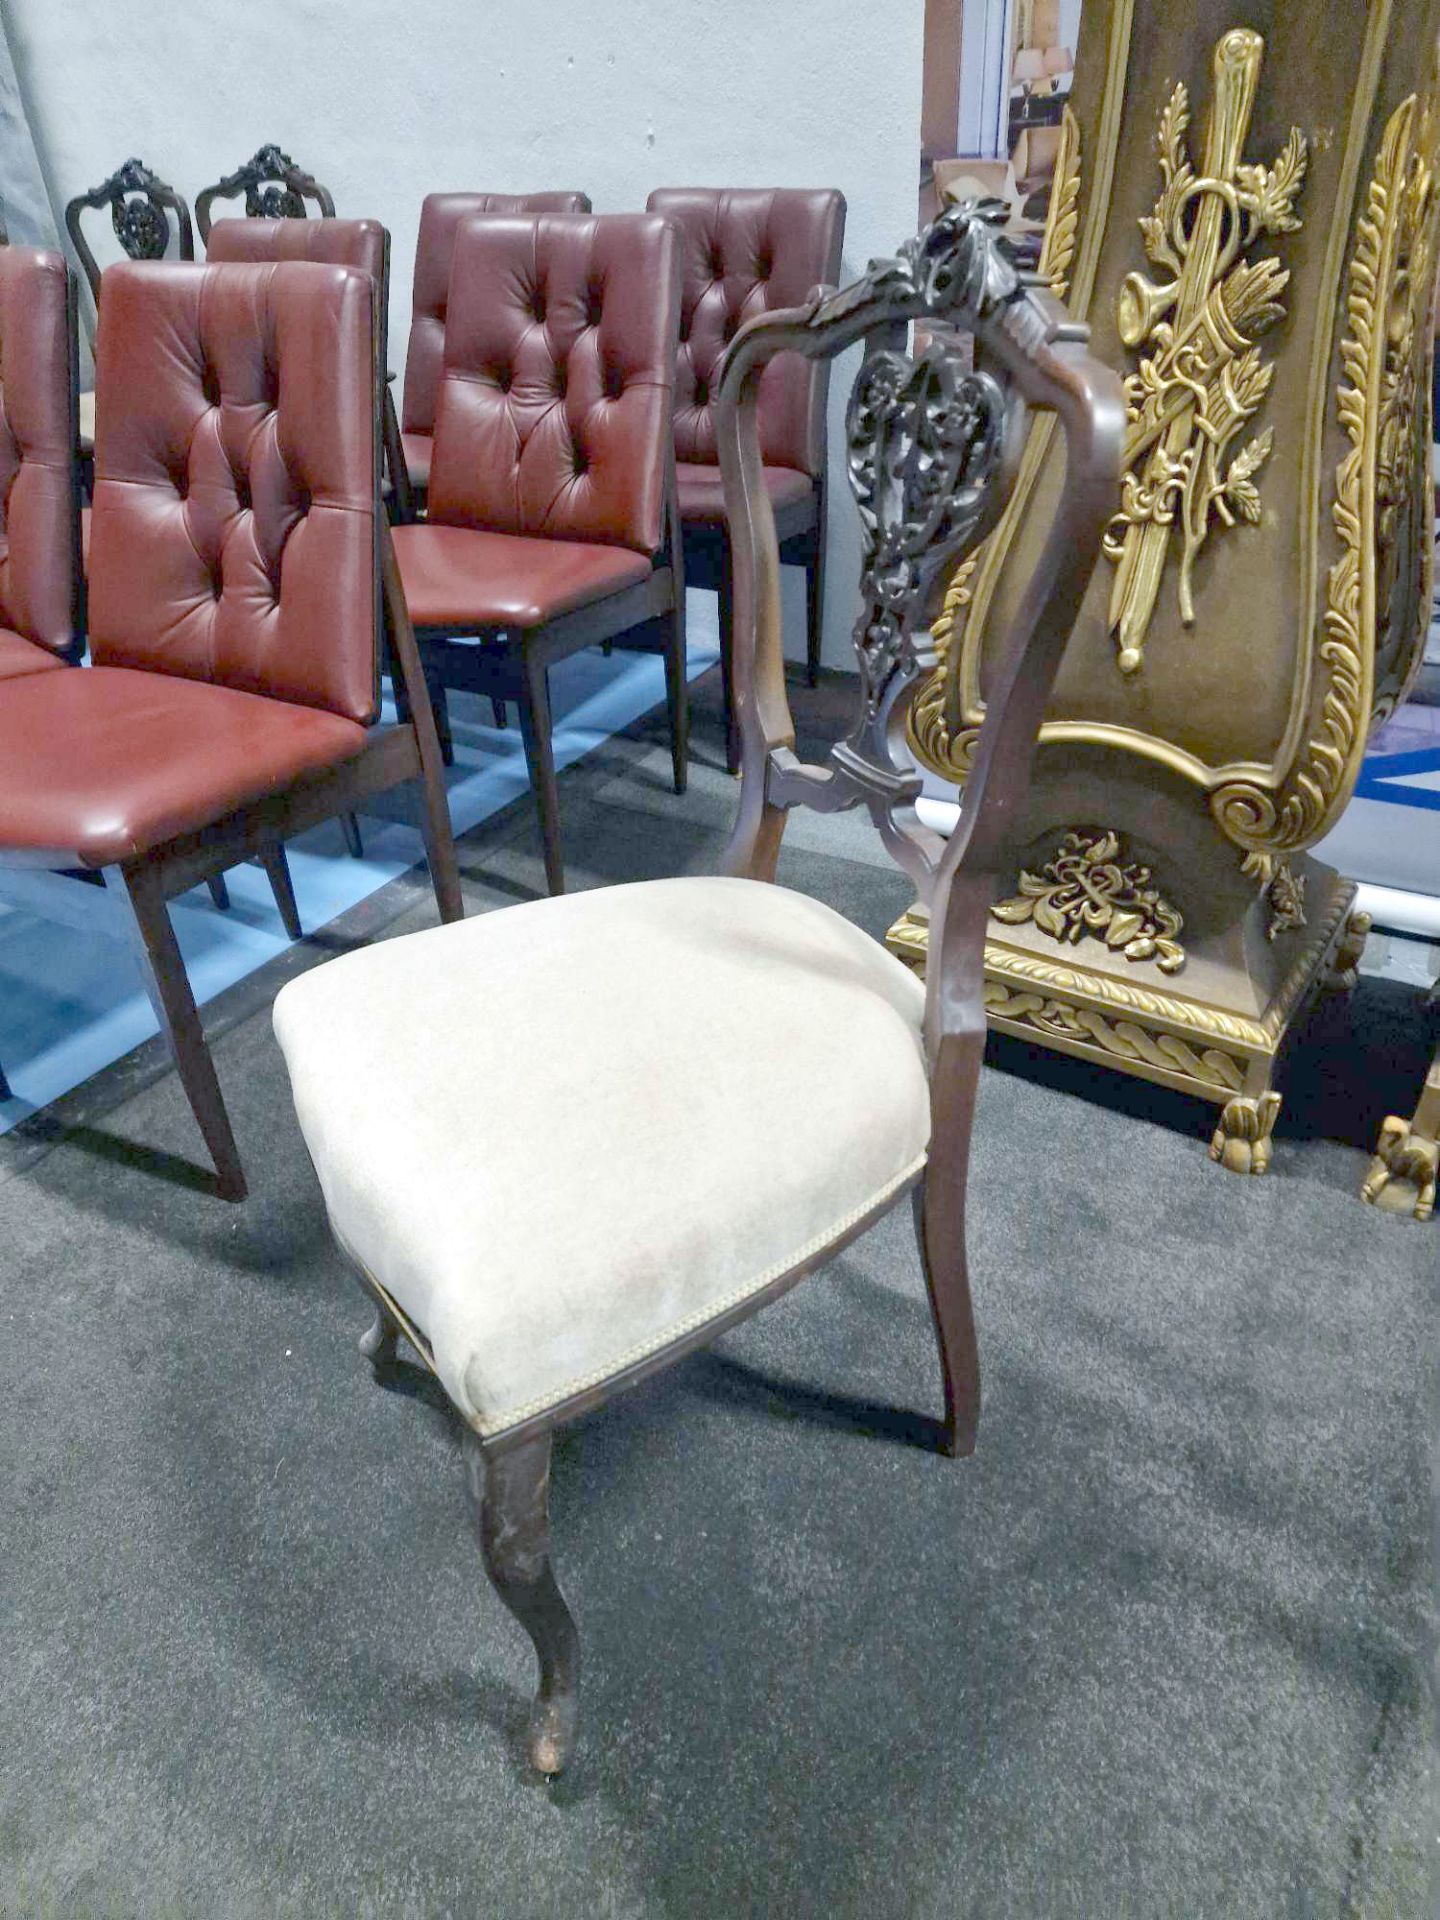 An Elegant Set of 4 Victorian Dining Chairs Elaborately Carved Top Rail And Shield Backs The Seats - Image 11 of 17